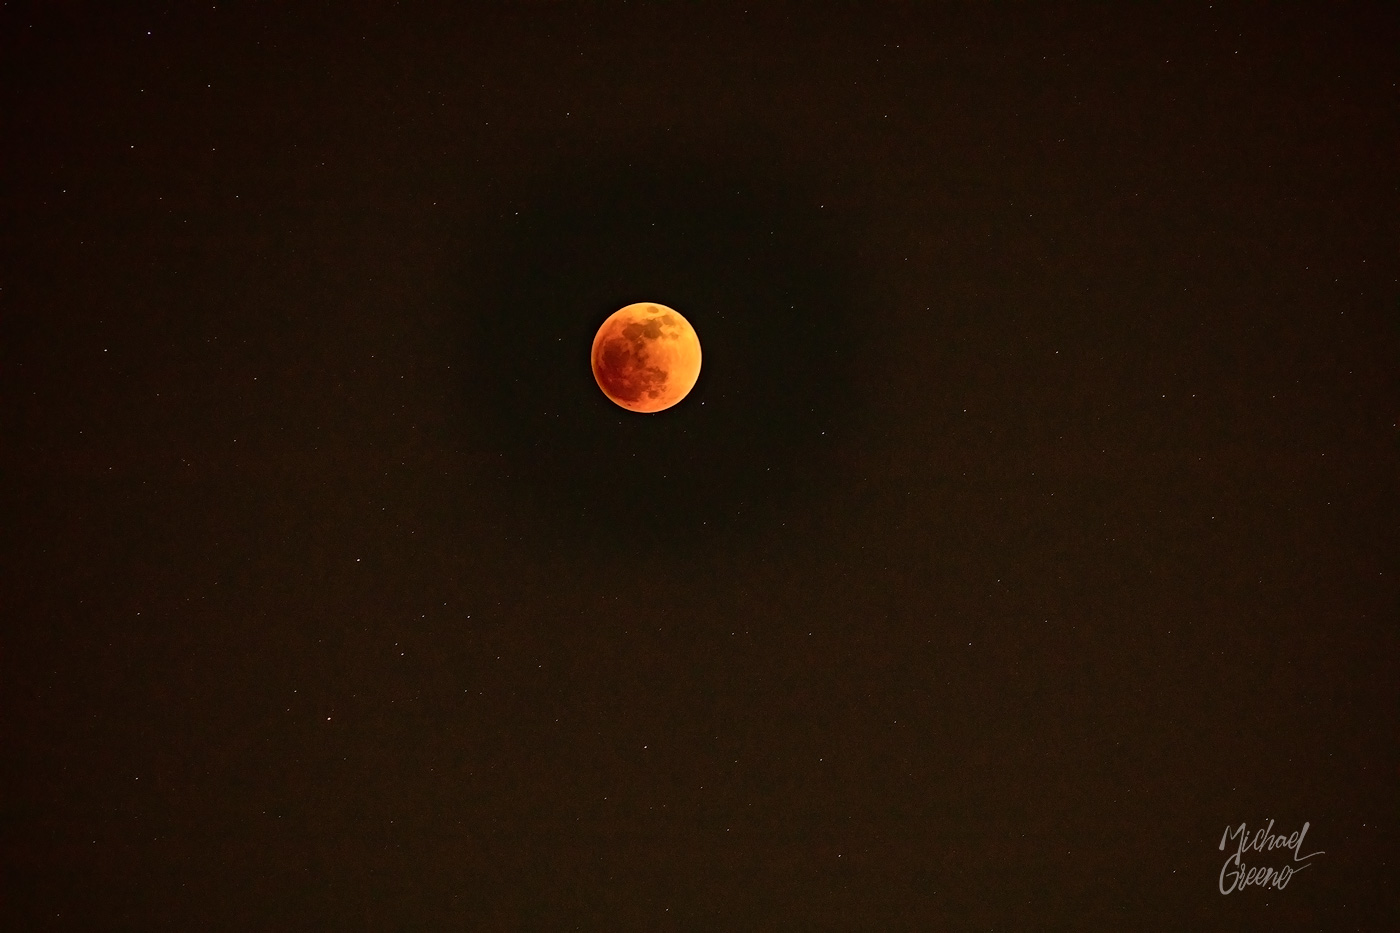 Full lunar eclipse captured near the Santa Catalina Mountains on the night of May 15, 2022.